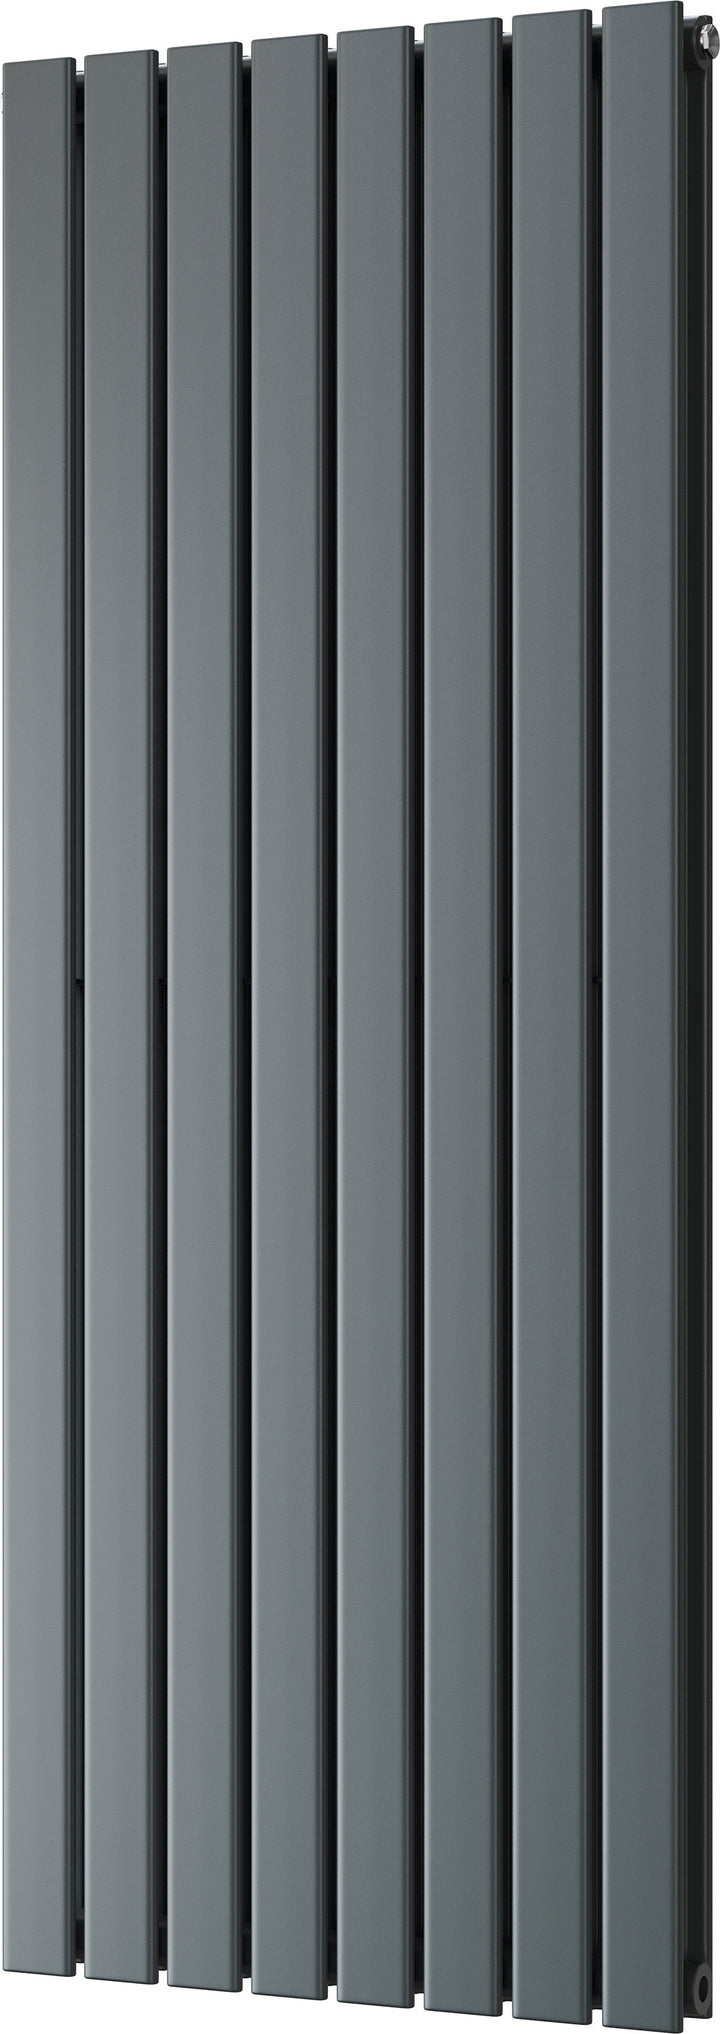 Typhoon - Anthracite Vertical Radiator H1400mm x W544mm Double Panel